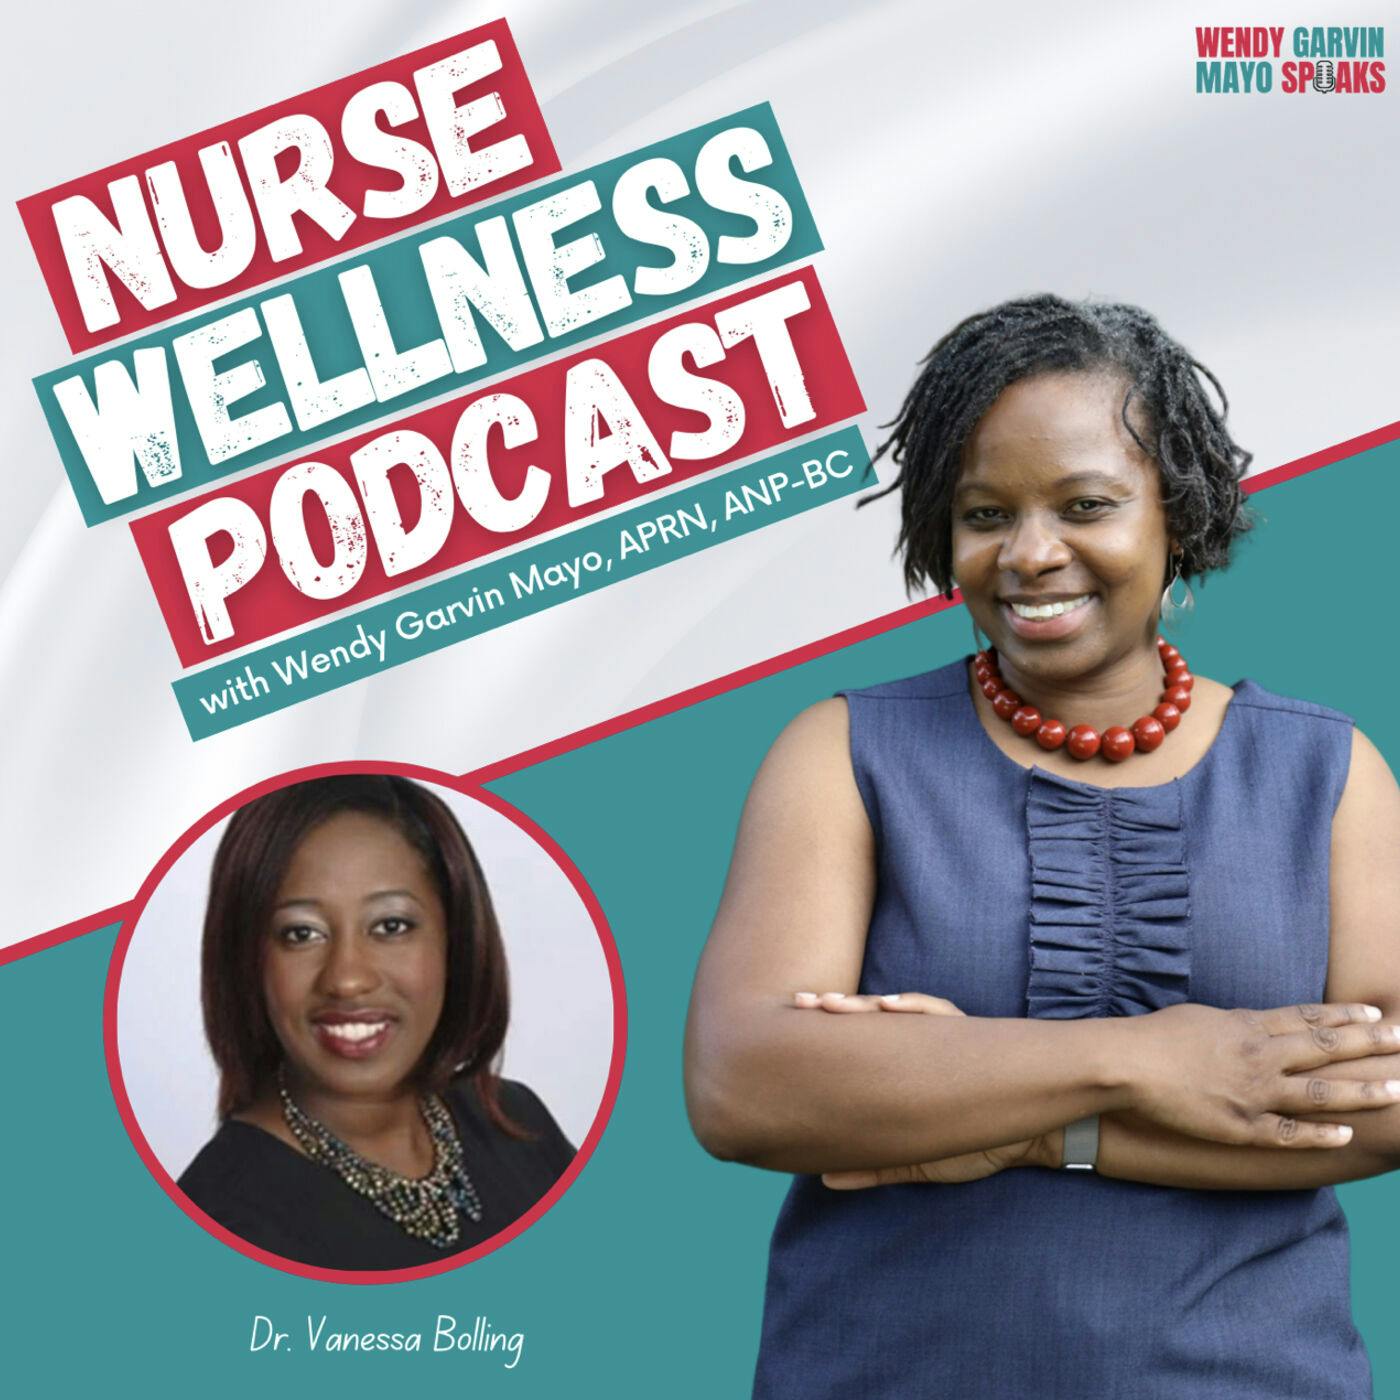 NWP: Are You A Change Agent? Dr. Vanessa Bolling with Wendy